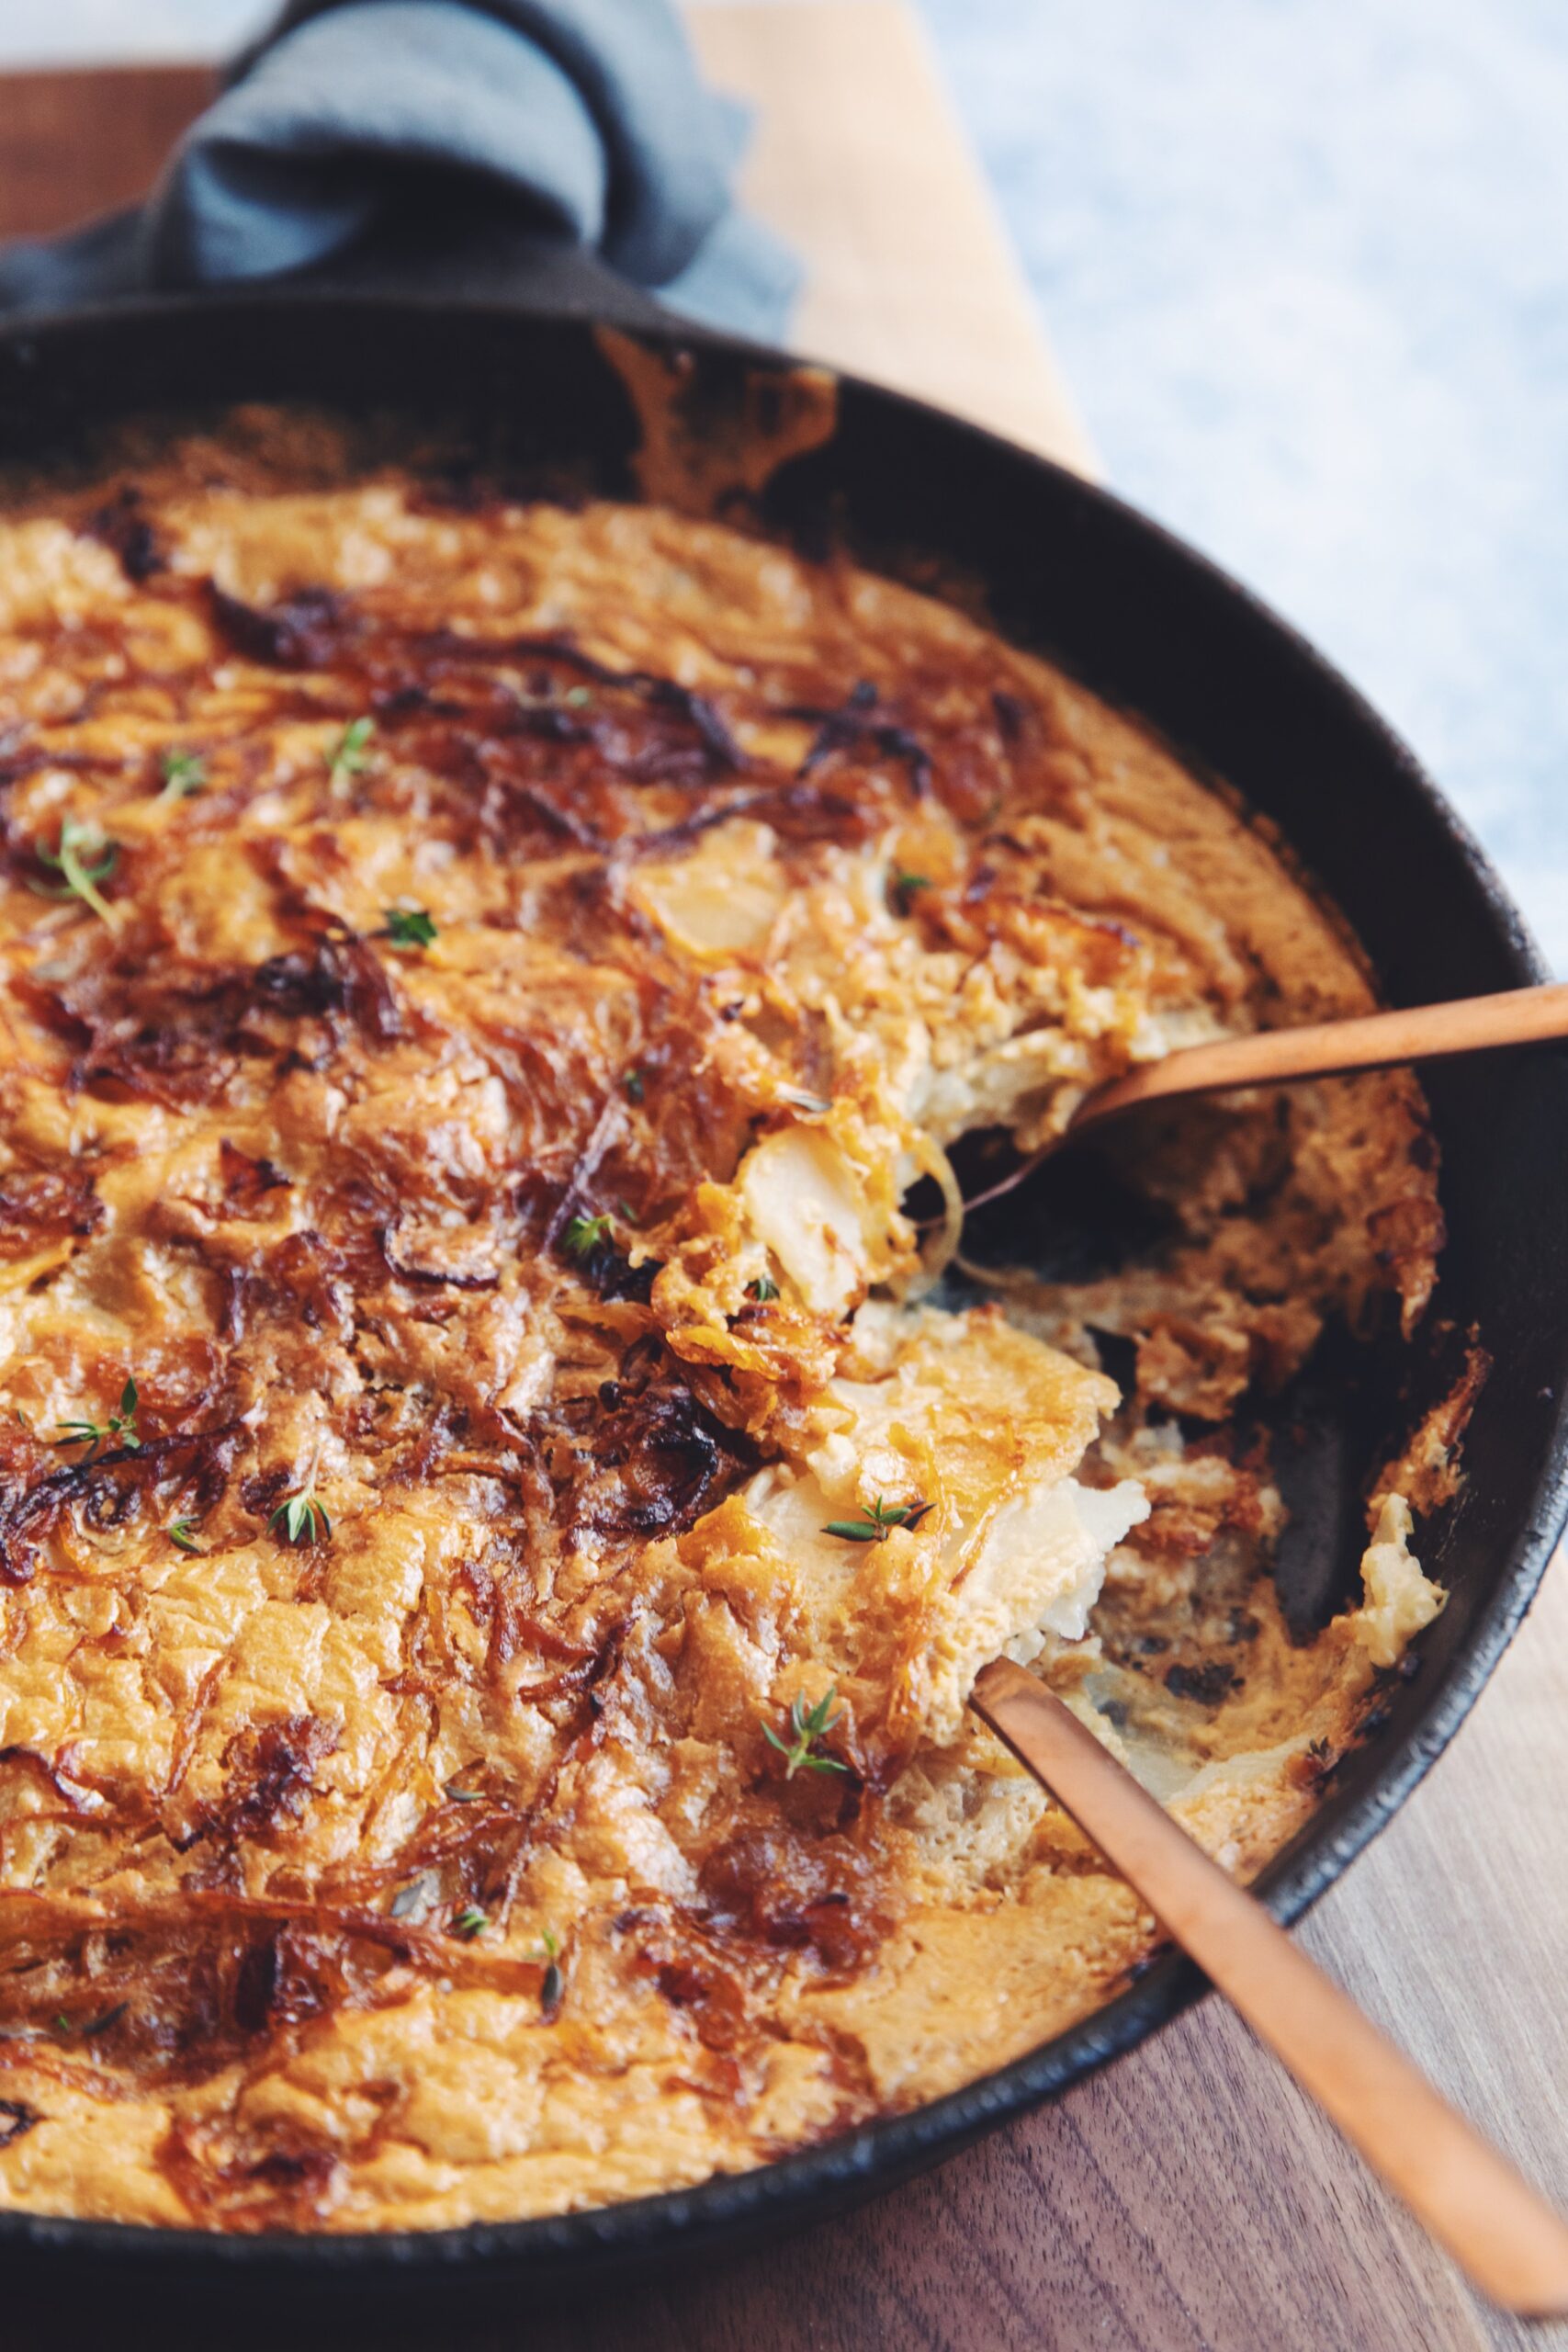 vegan scalloped potatoes recipe with caramelized onions